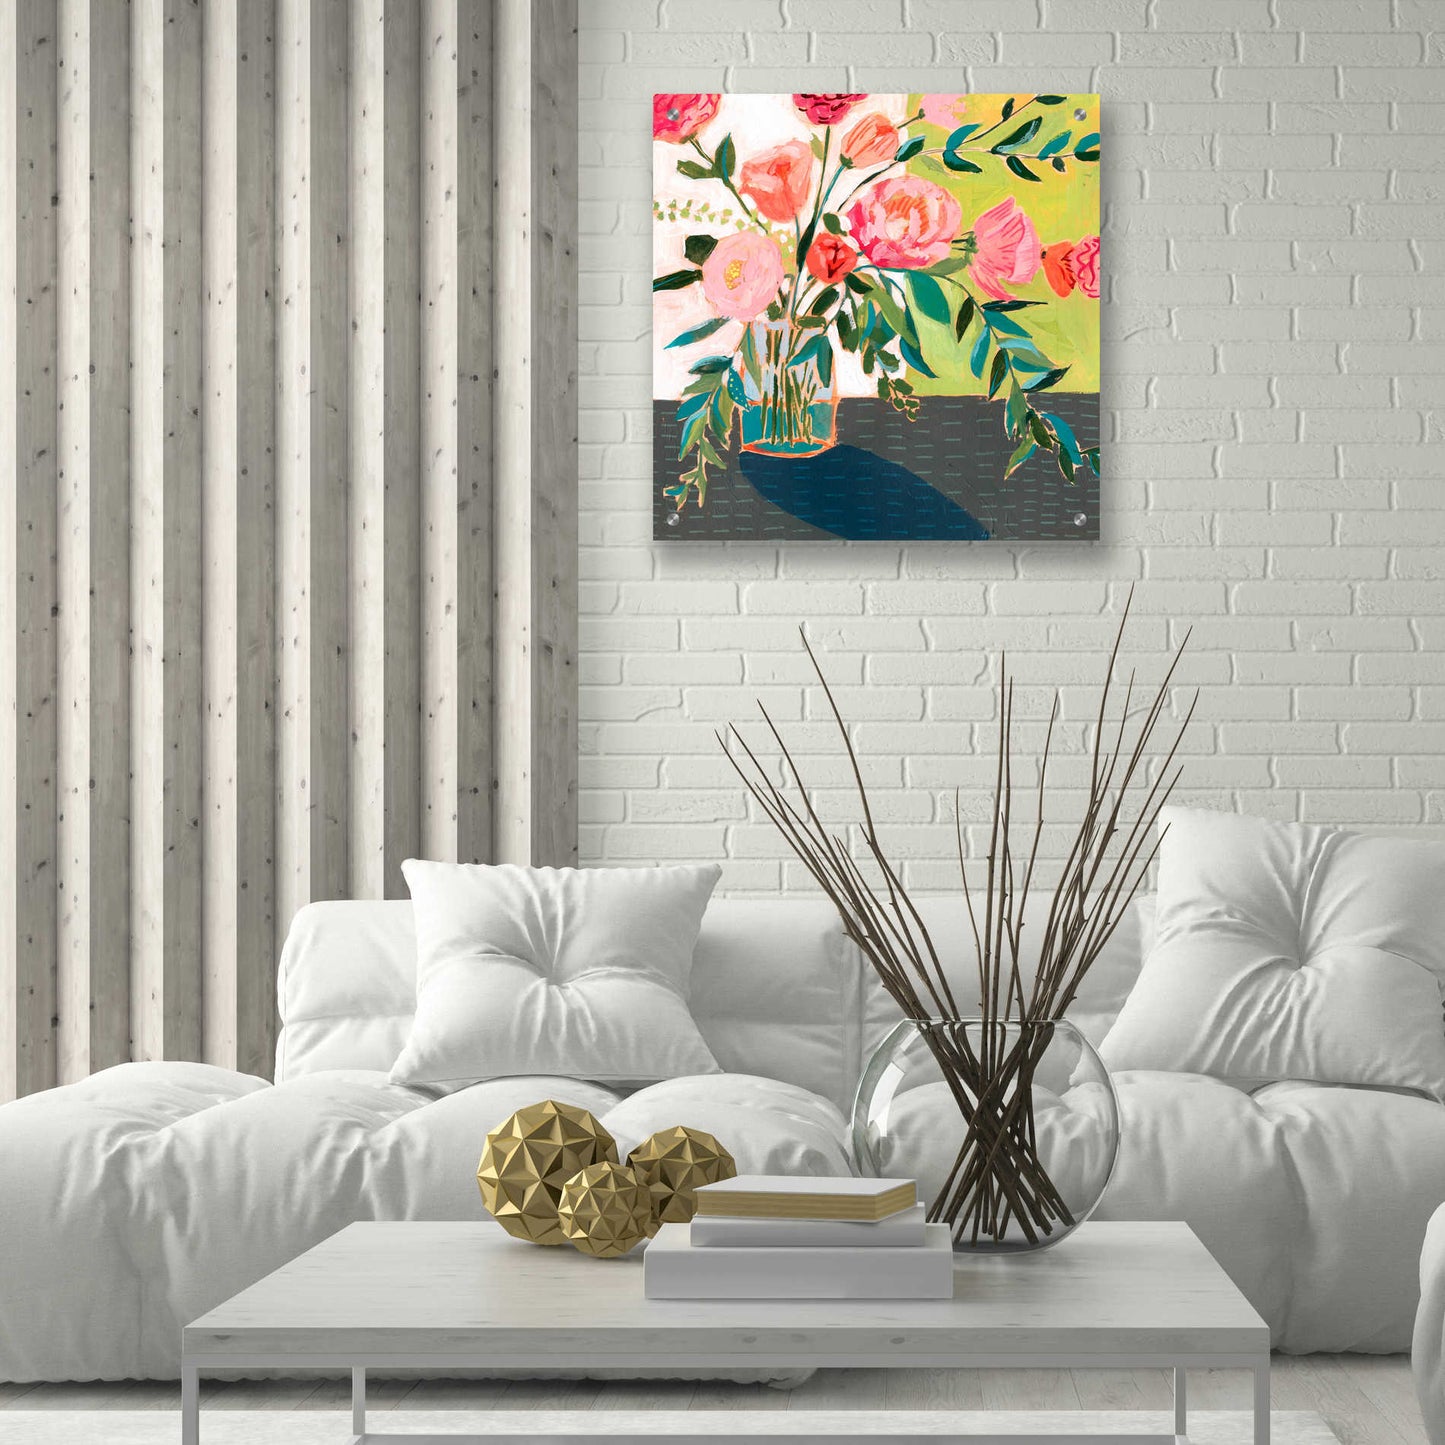 Epic Art 'Quirky Bouquet I' by Victoria Borges, Acrylic Wall Art,24x24